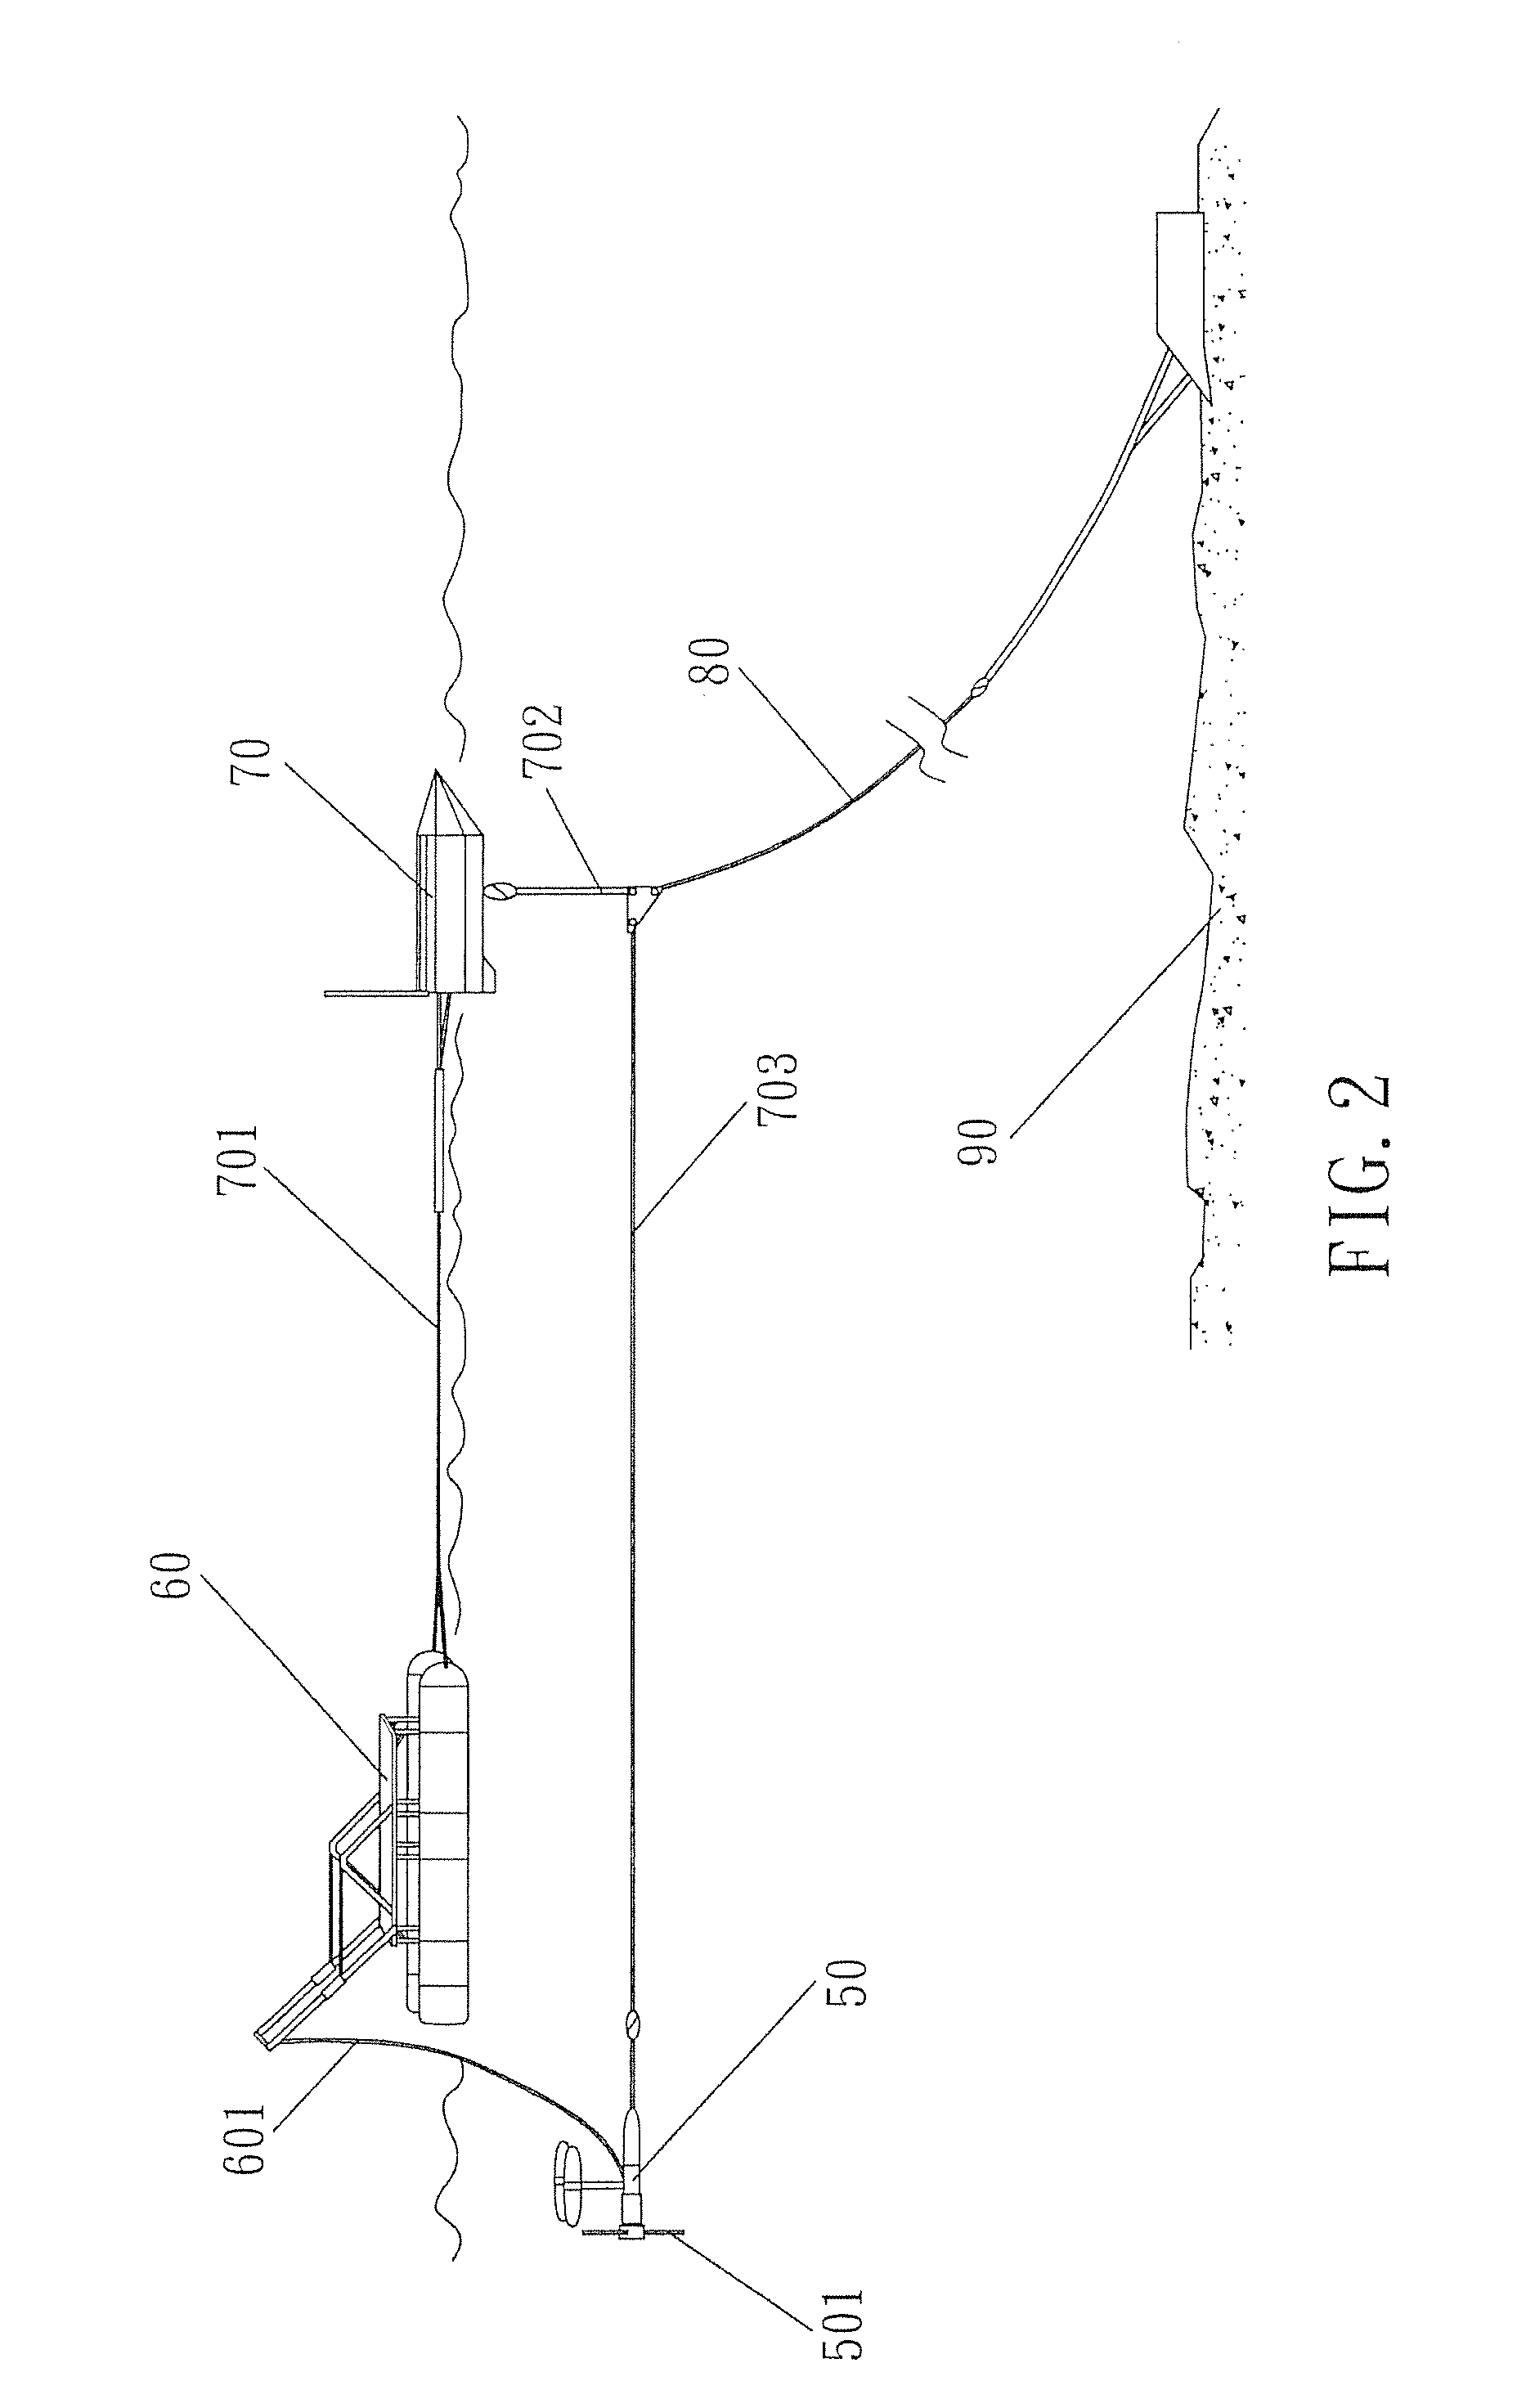 Self-positioning device for water turbine